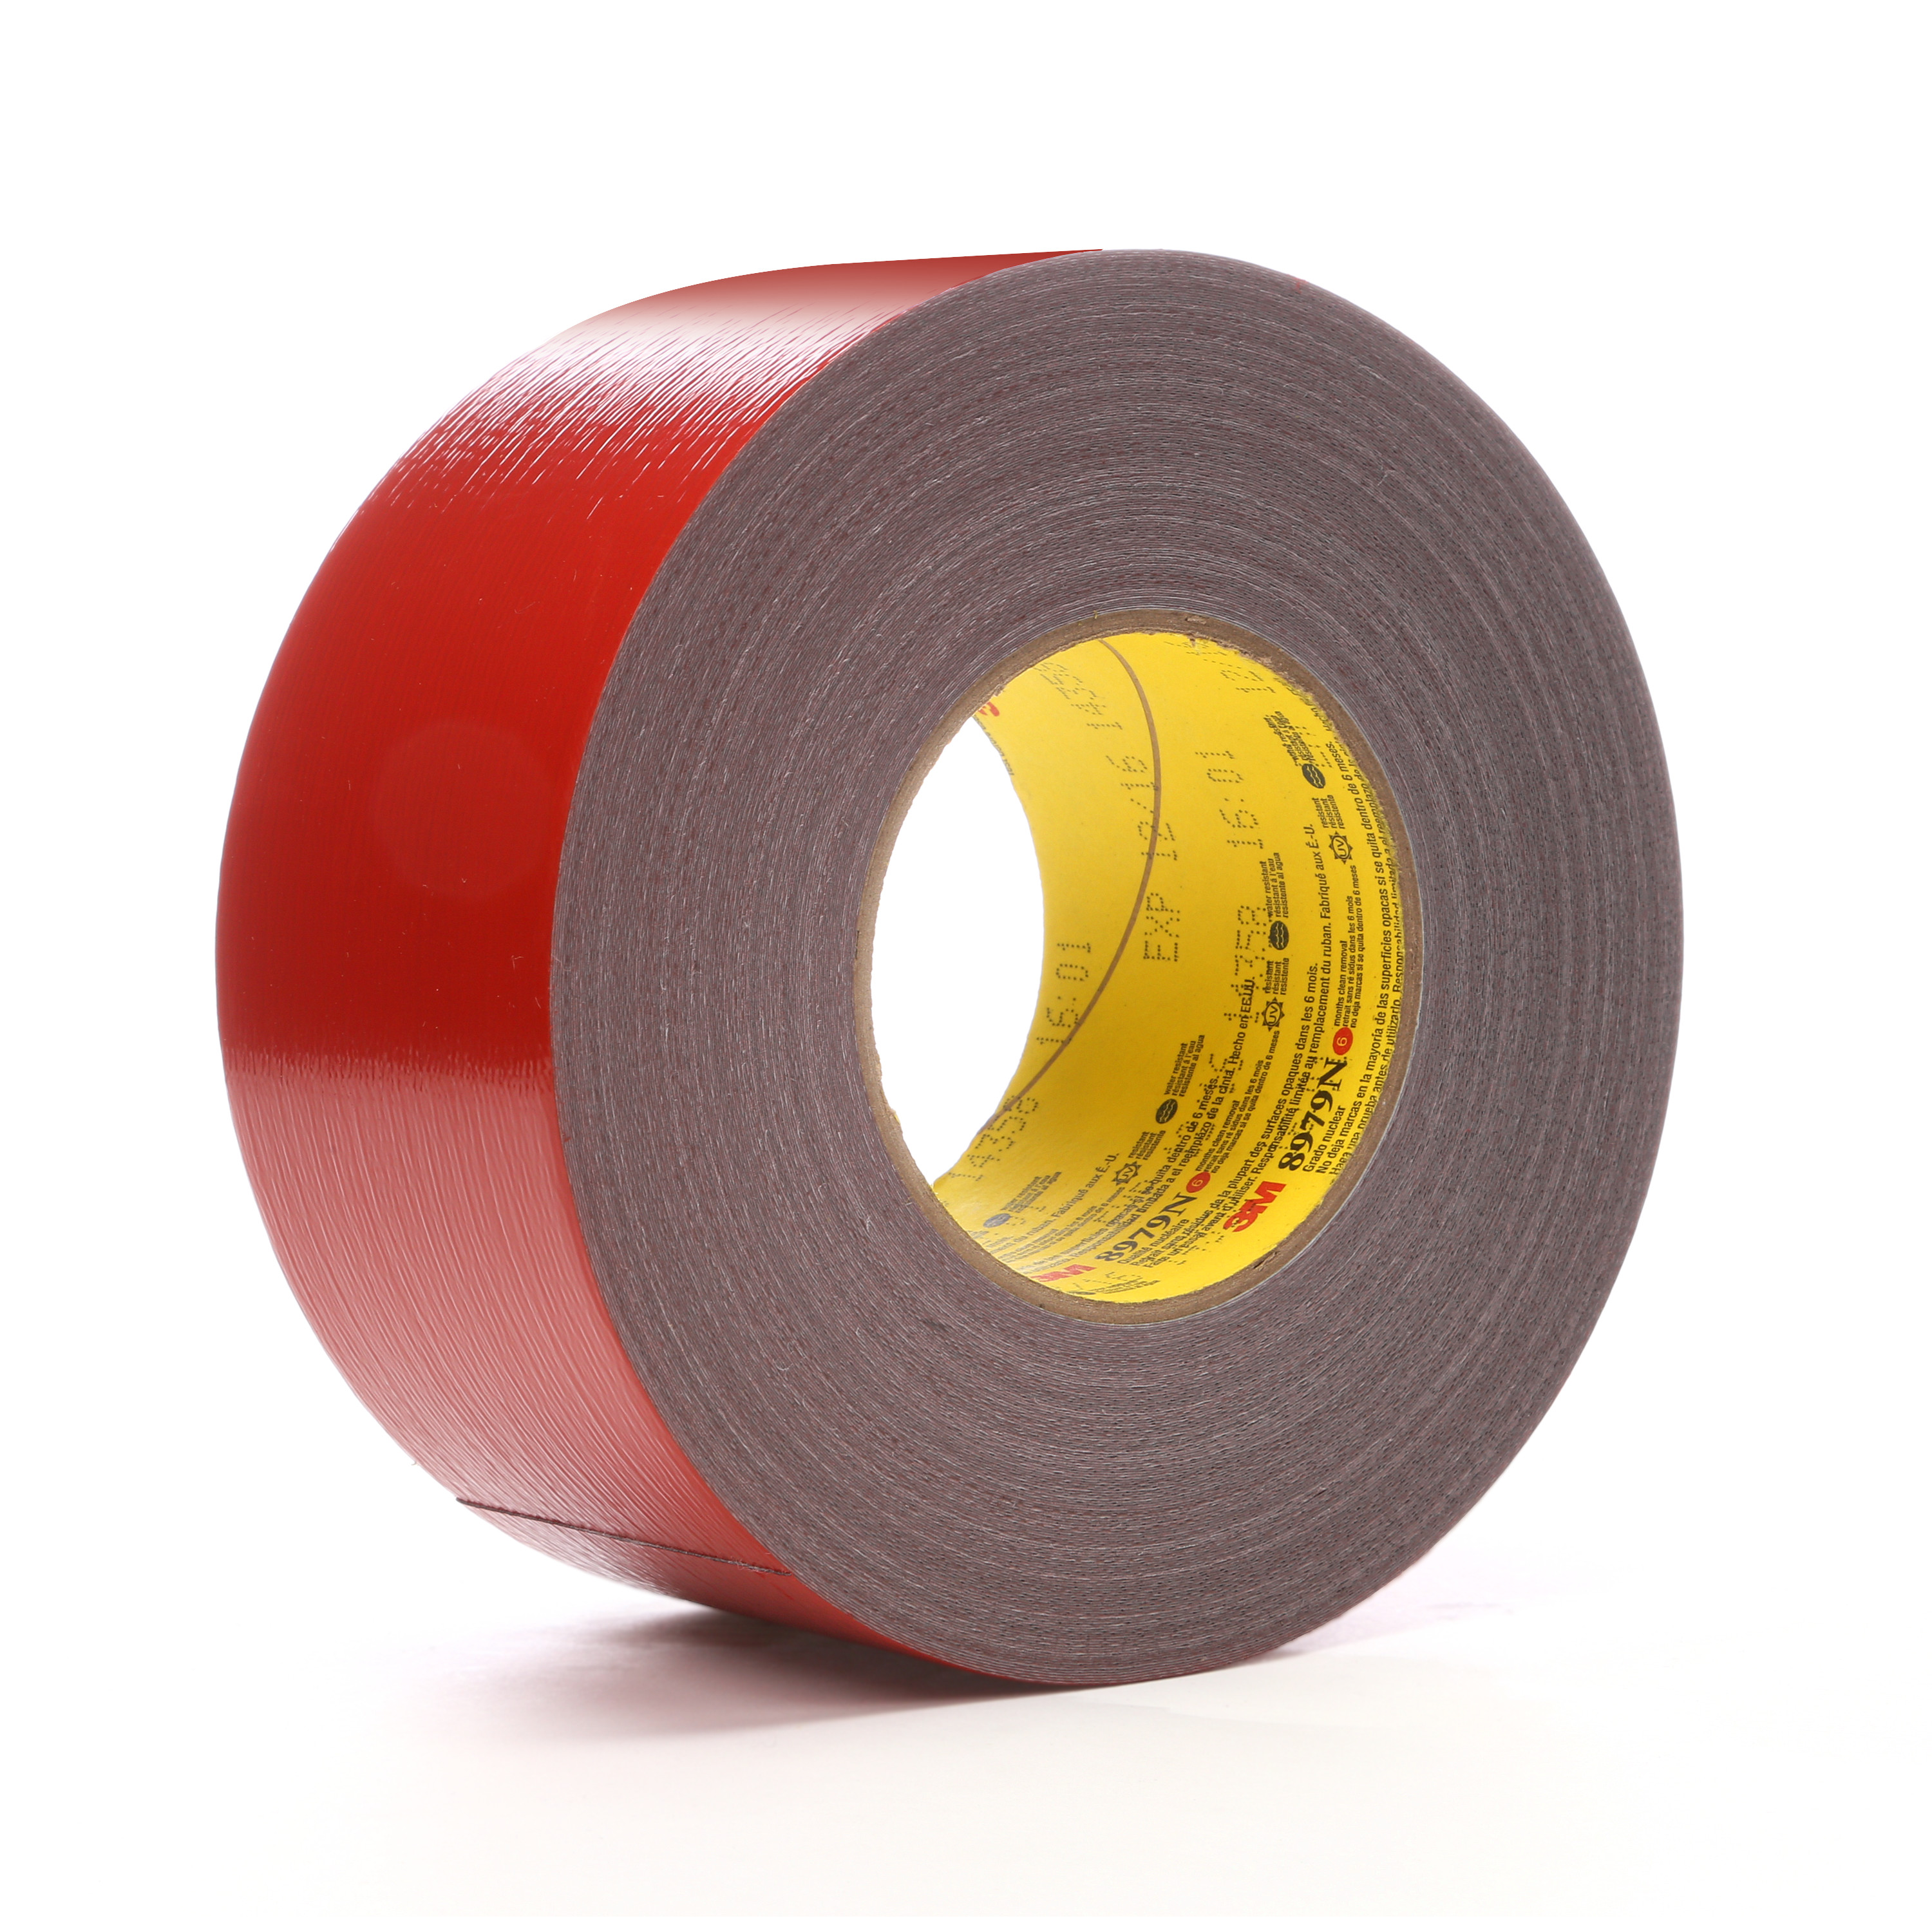 3M™ Performance Plus Duct Tape 8979N (Nuclear), Red, 72 mm x 54.8 m,
12.1 mil, 12 per case